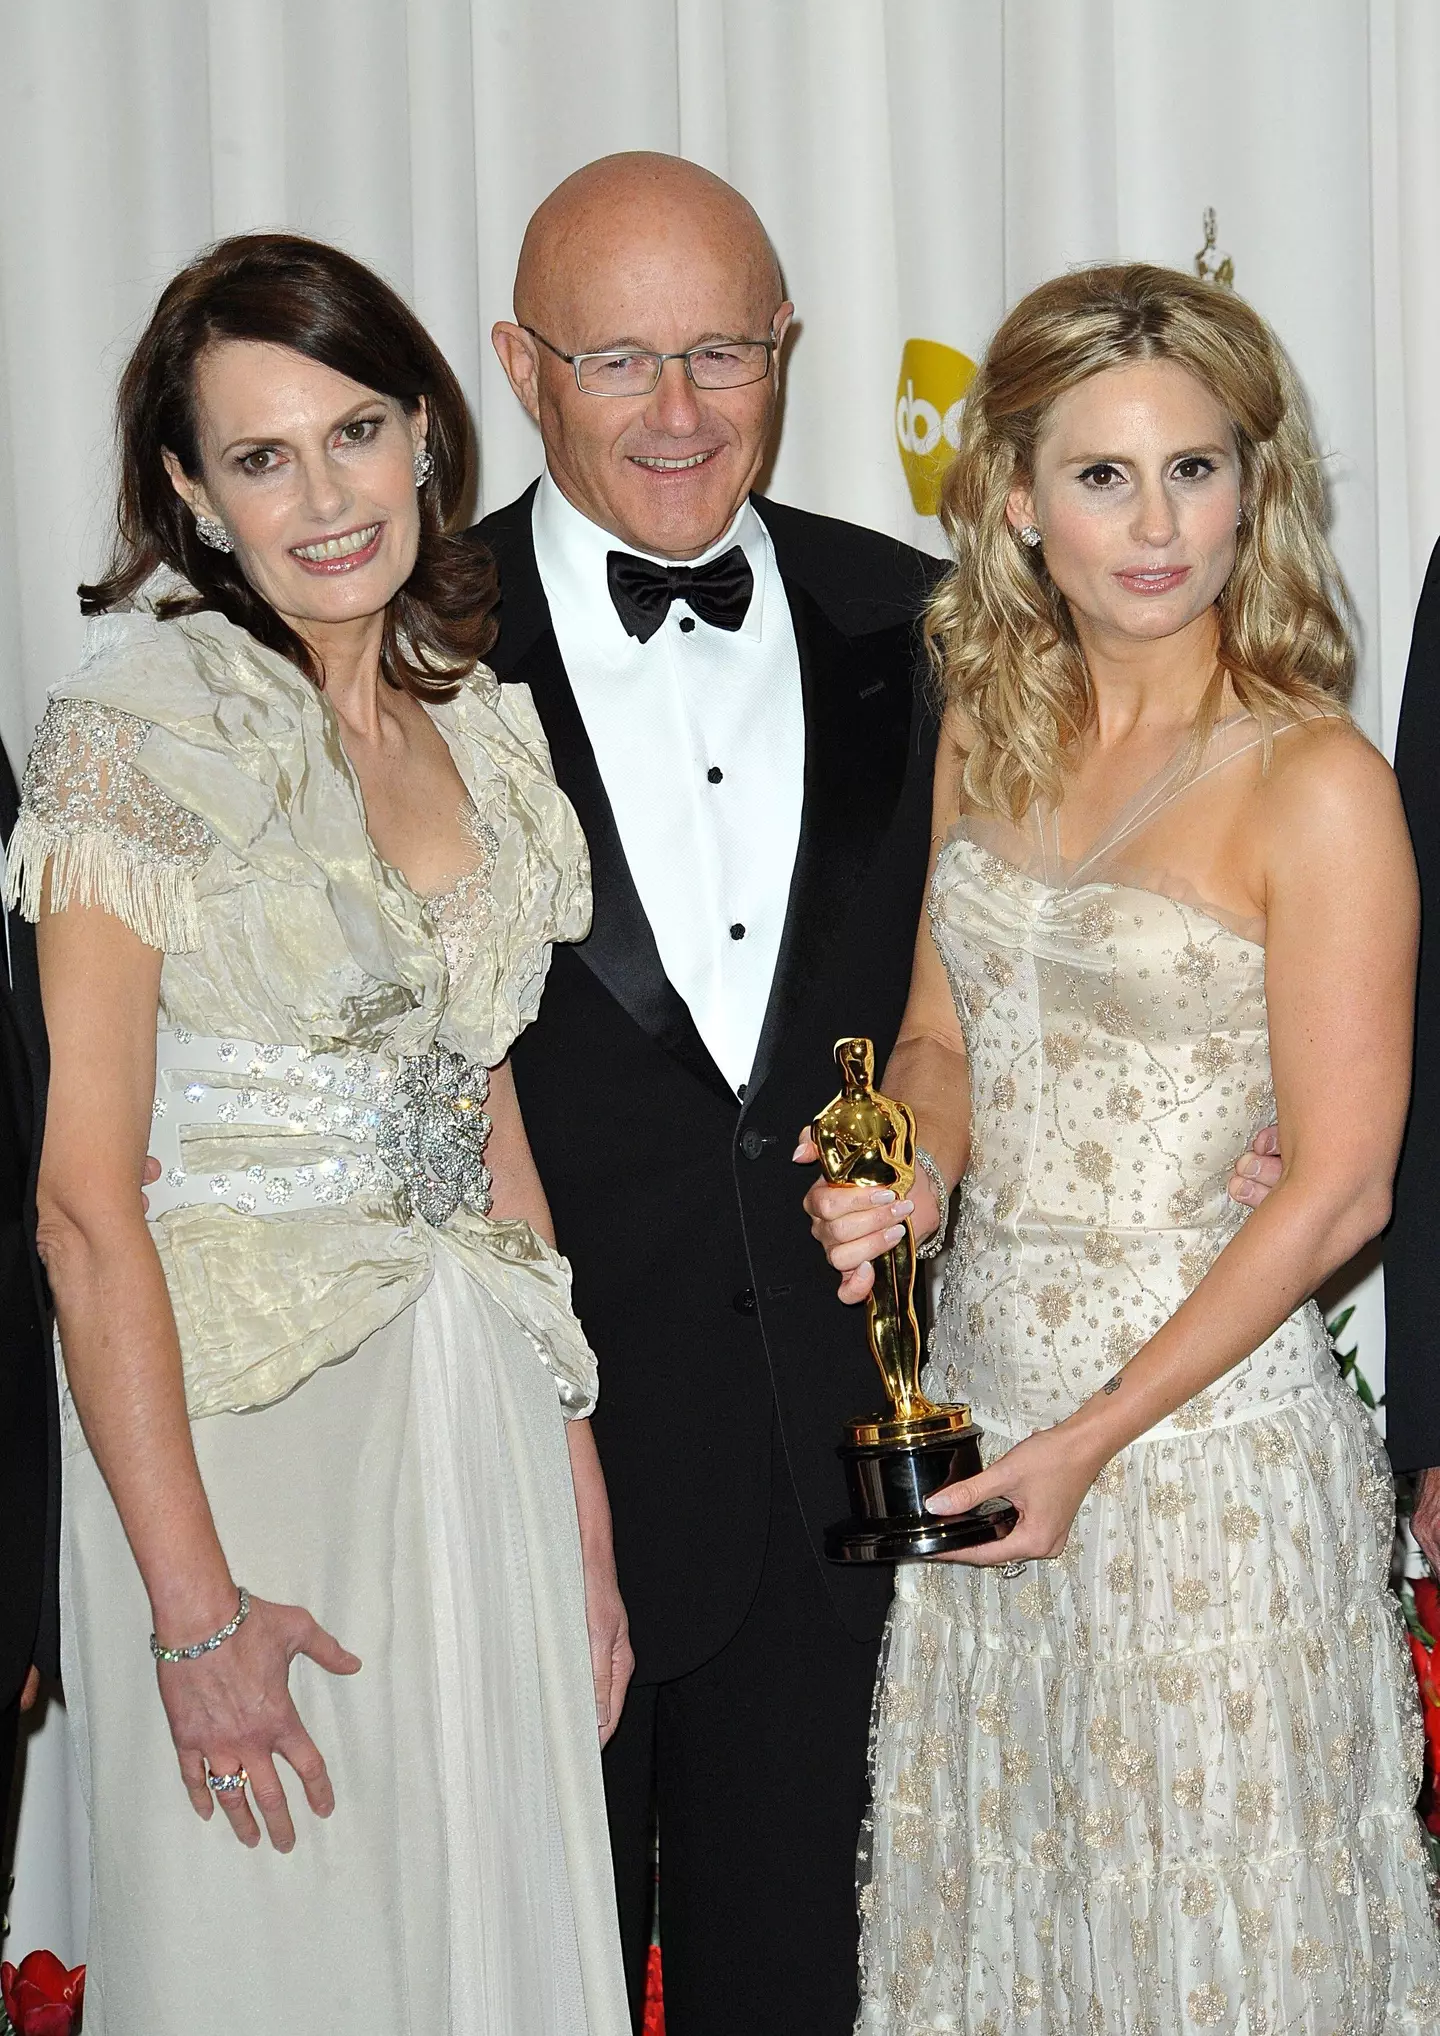 Sally Bell (L), Kim Ledger (middle) and Kate Ledger (R) accept Heath Ledger's award for Performance by an Actor in a Supporting Role.